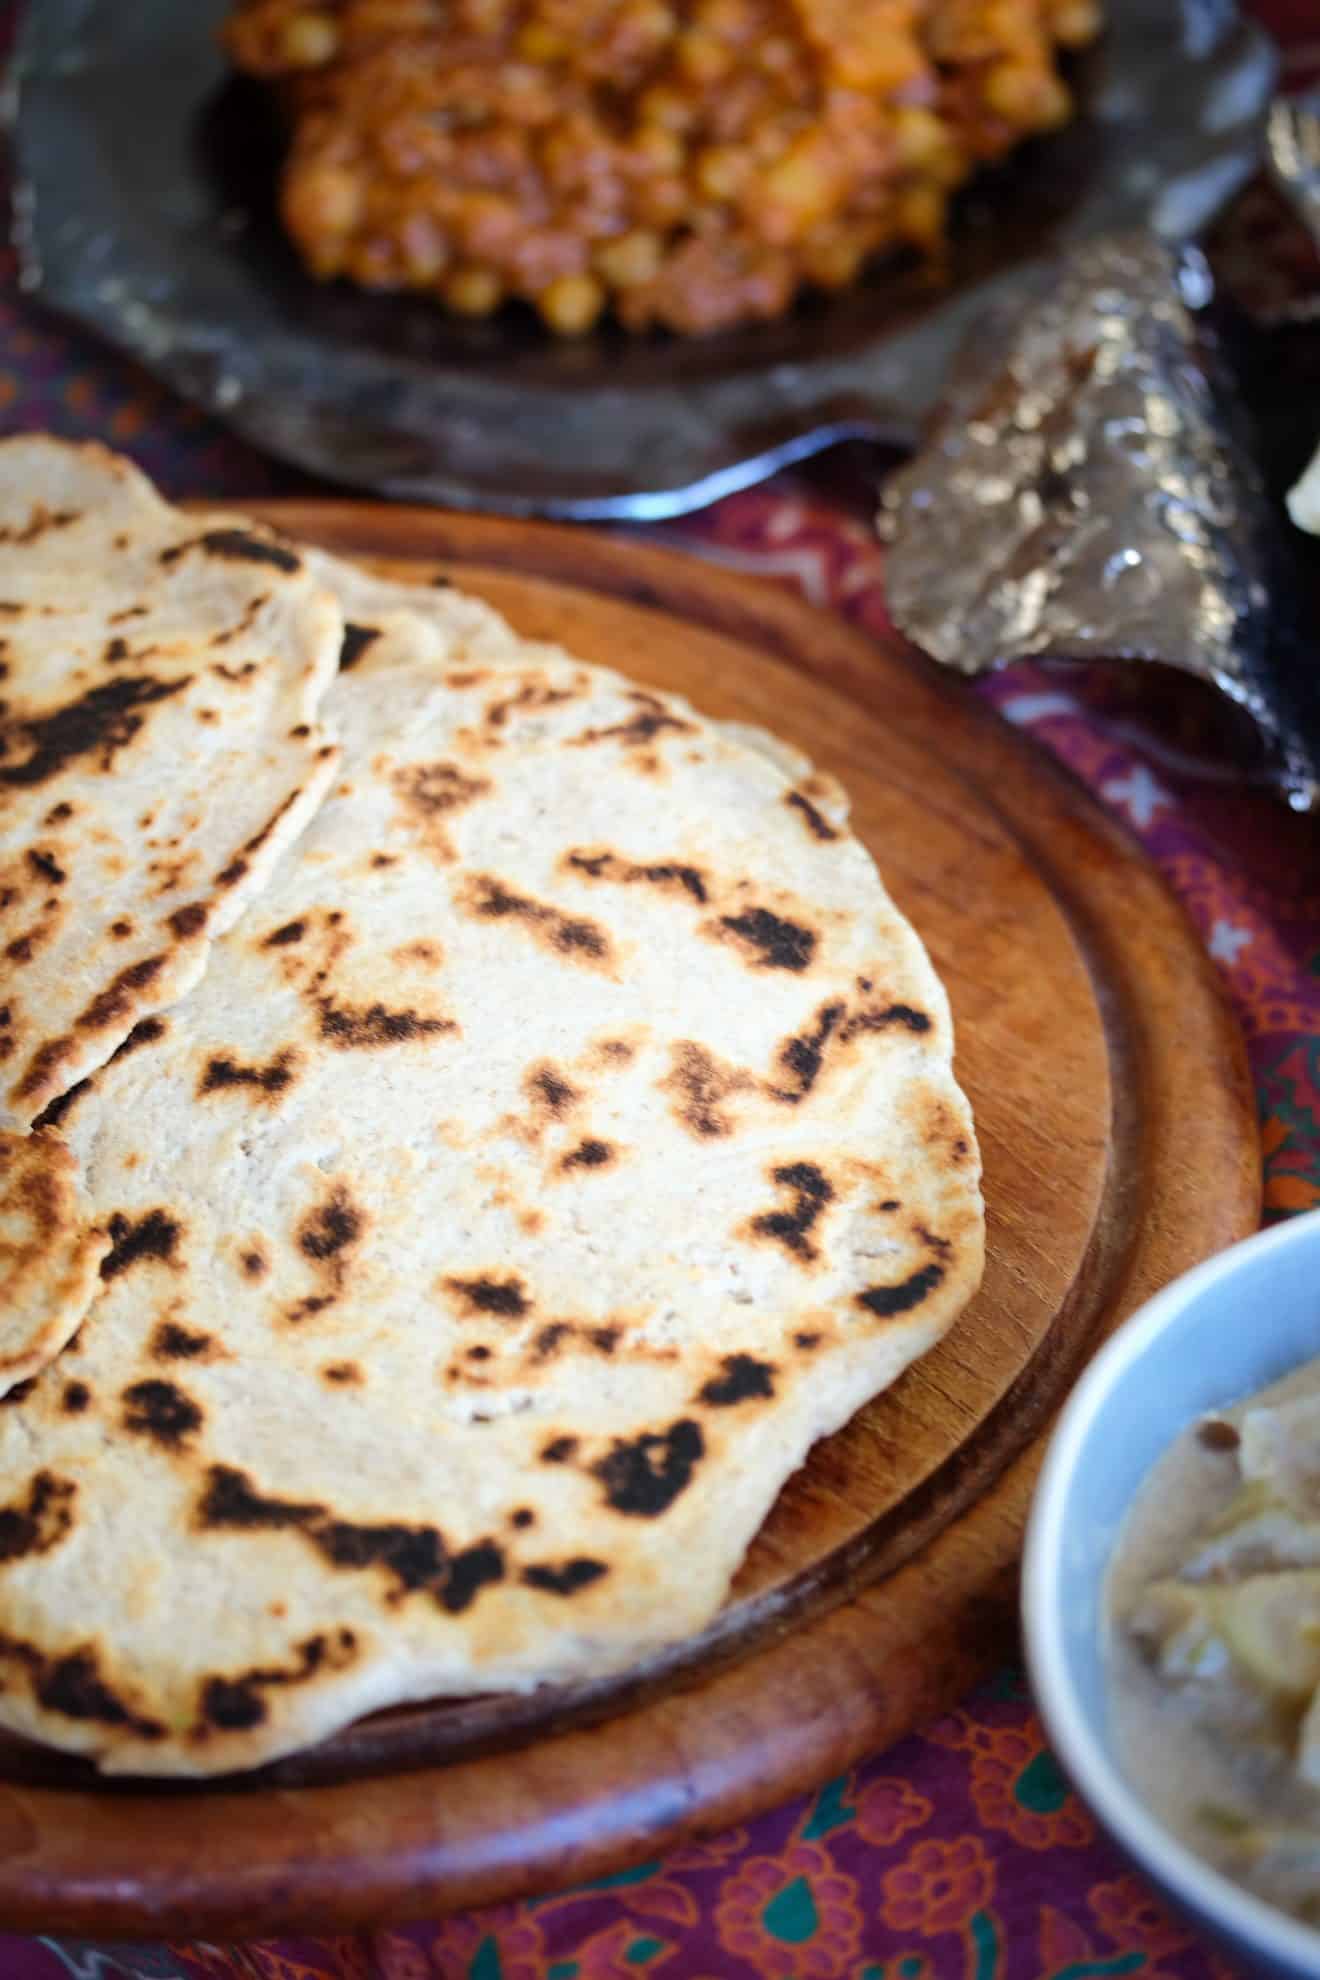 Indian Naan Bread "What you all have been waiting for" - True Foods Blog